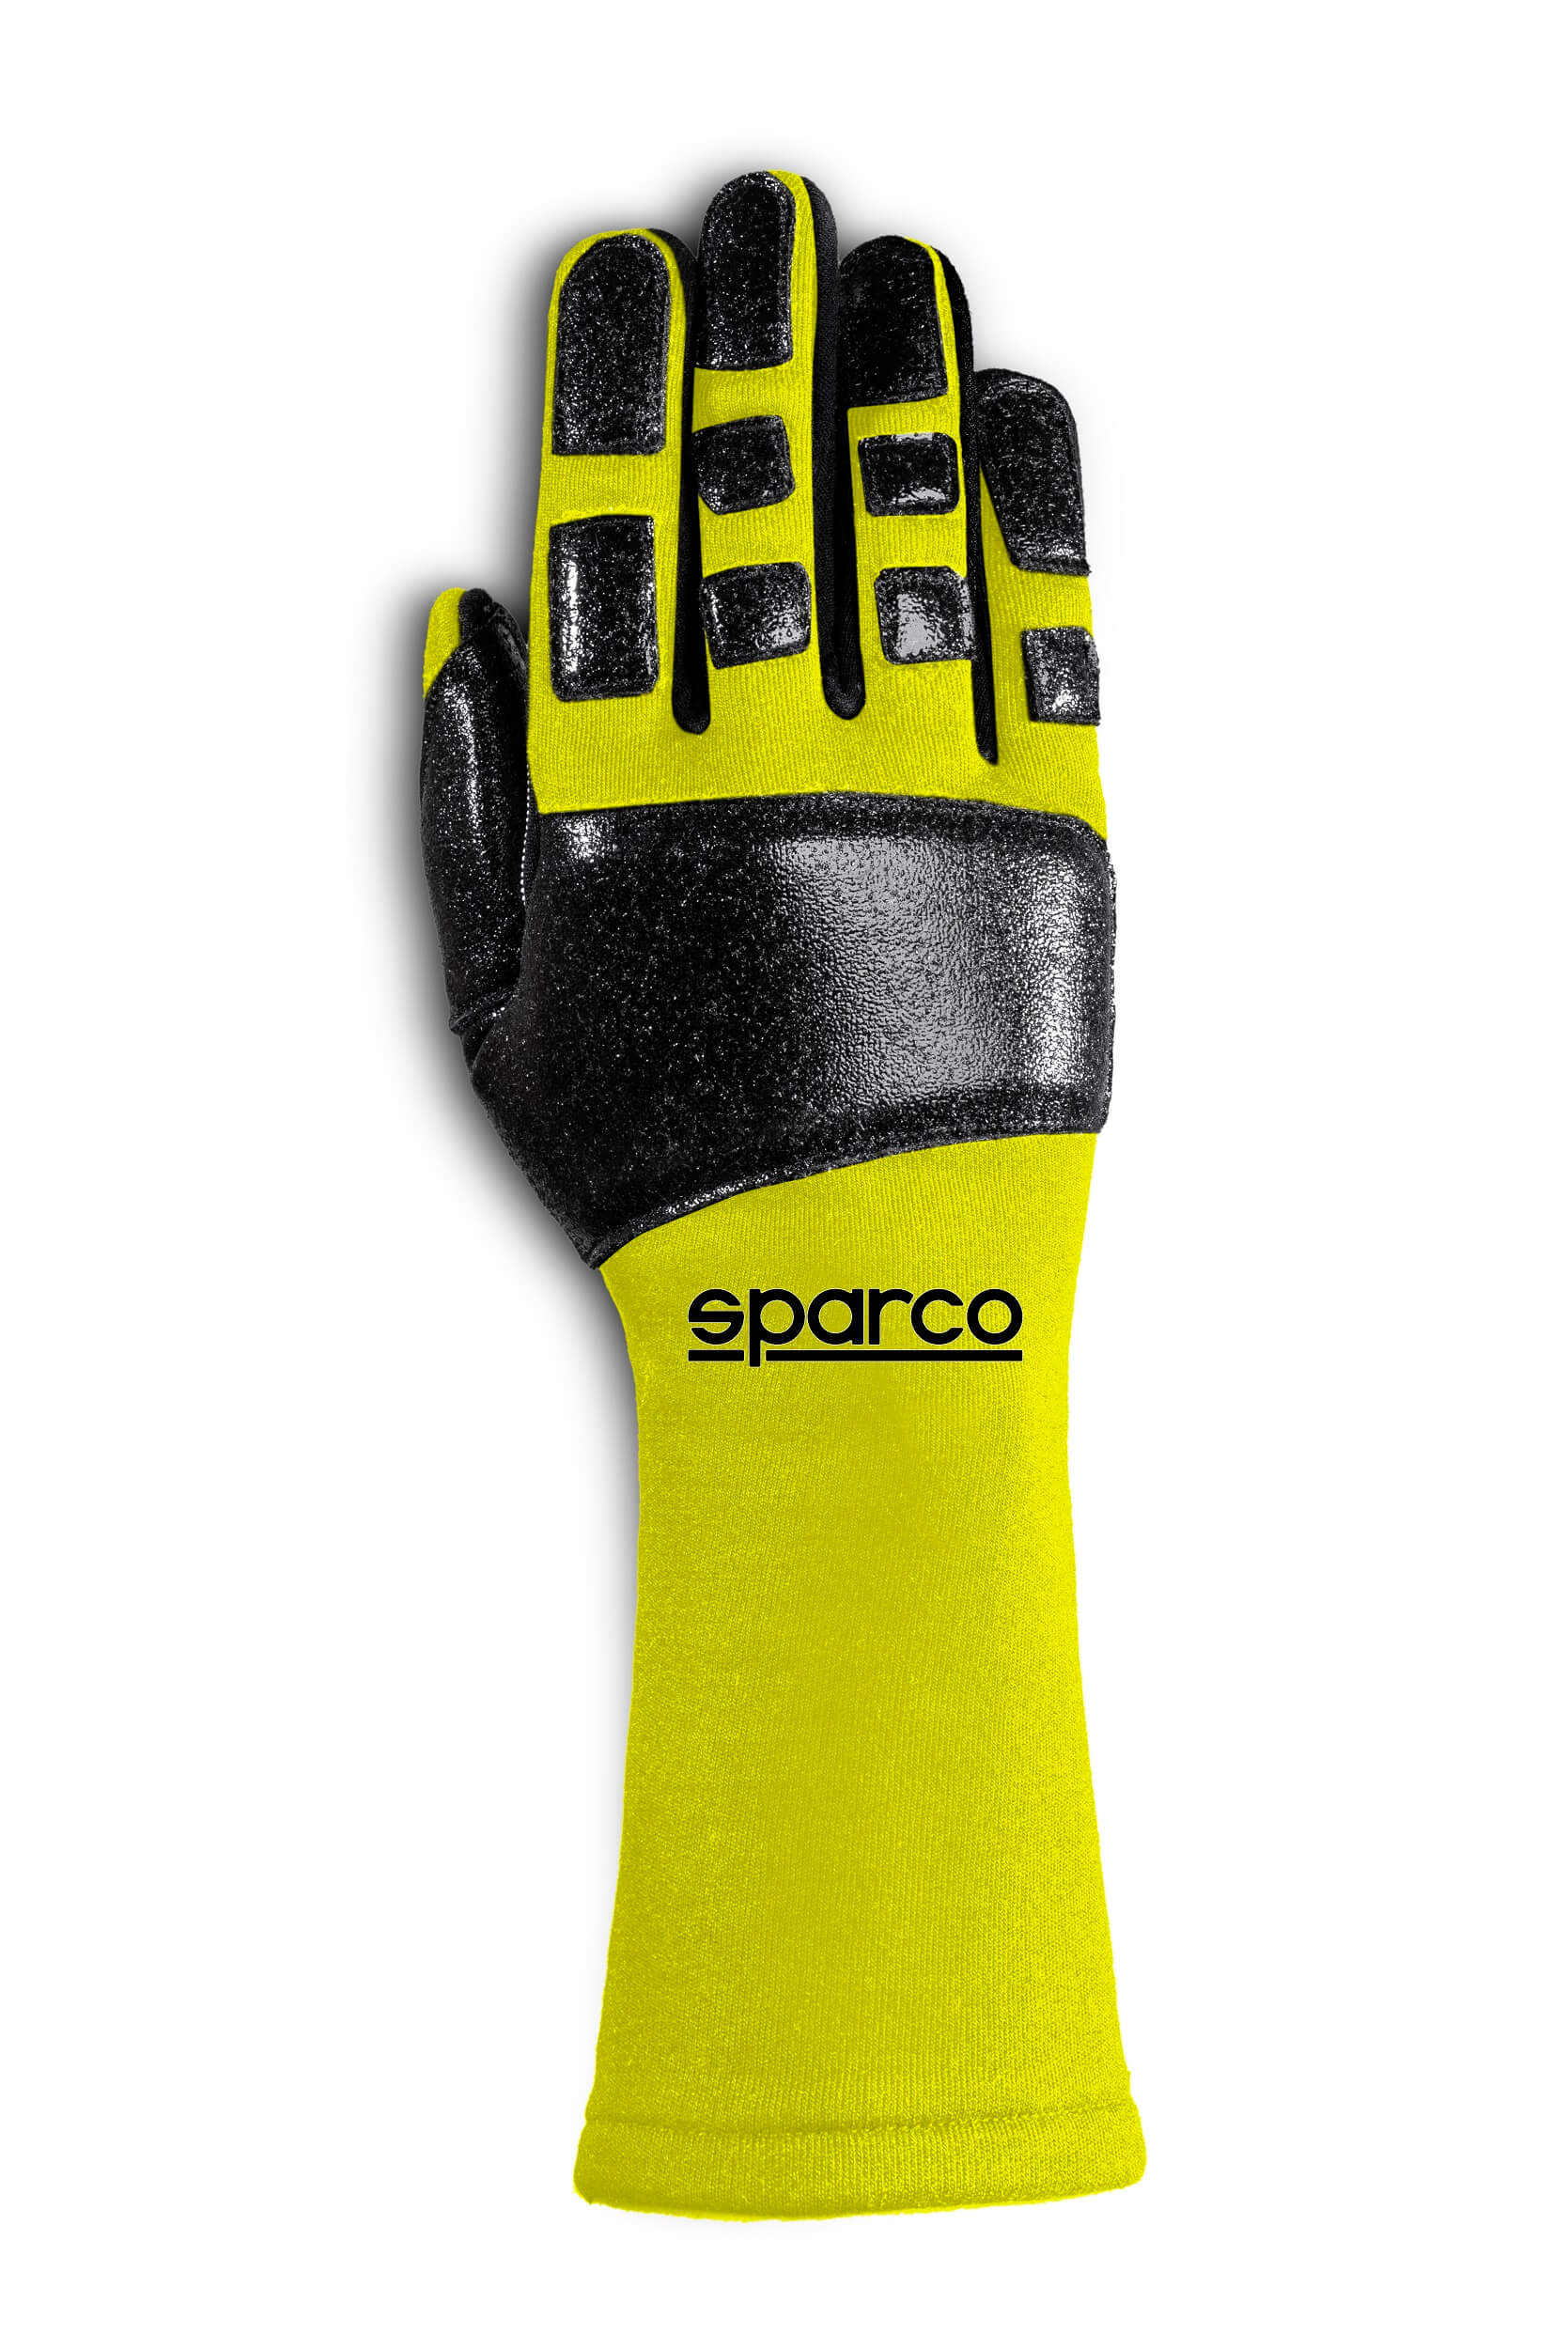 SPARCO 00131810GF TIDE MECA Gloves, NOT FIA, yellow, size 10 Photo-0 